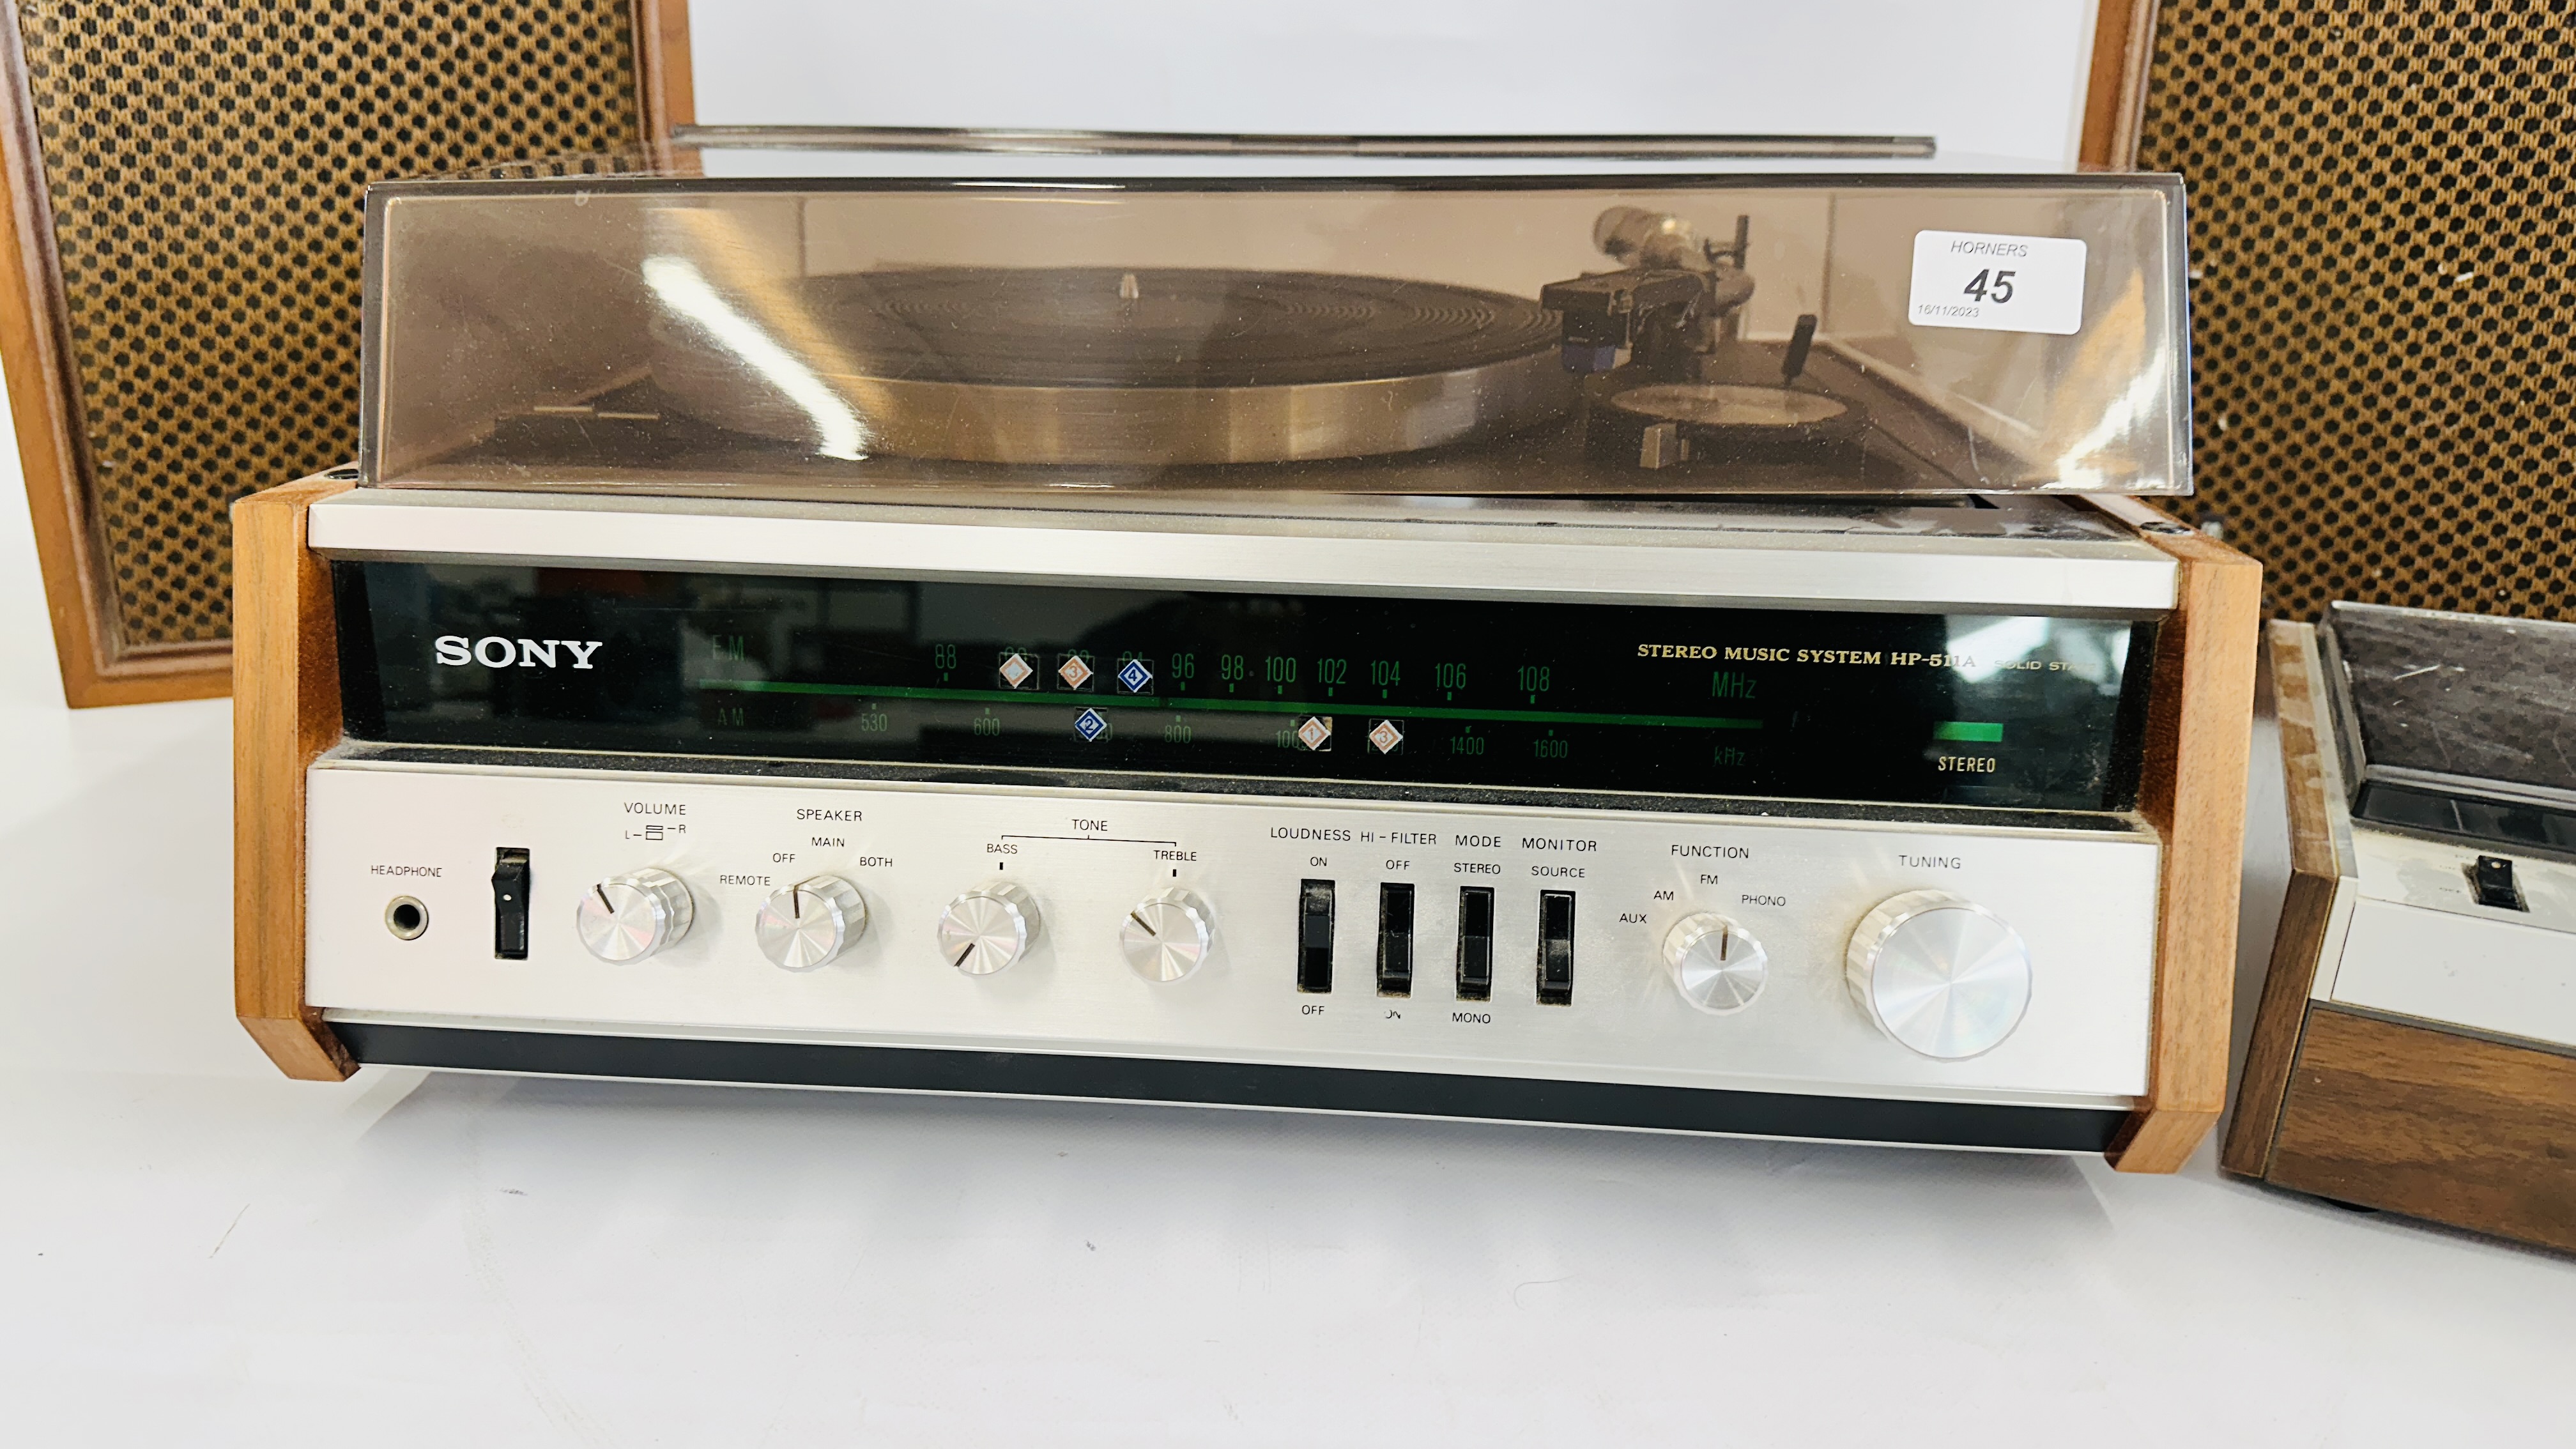 RETRO SONY STEREO MUSIC SYSTEM MODEL HP-511A COMPLETE WITH SONY SS-510 SPEAKER SYSTEM AND SONY - Image 2 of 9